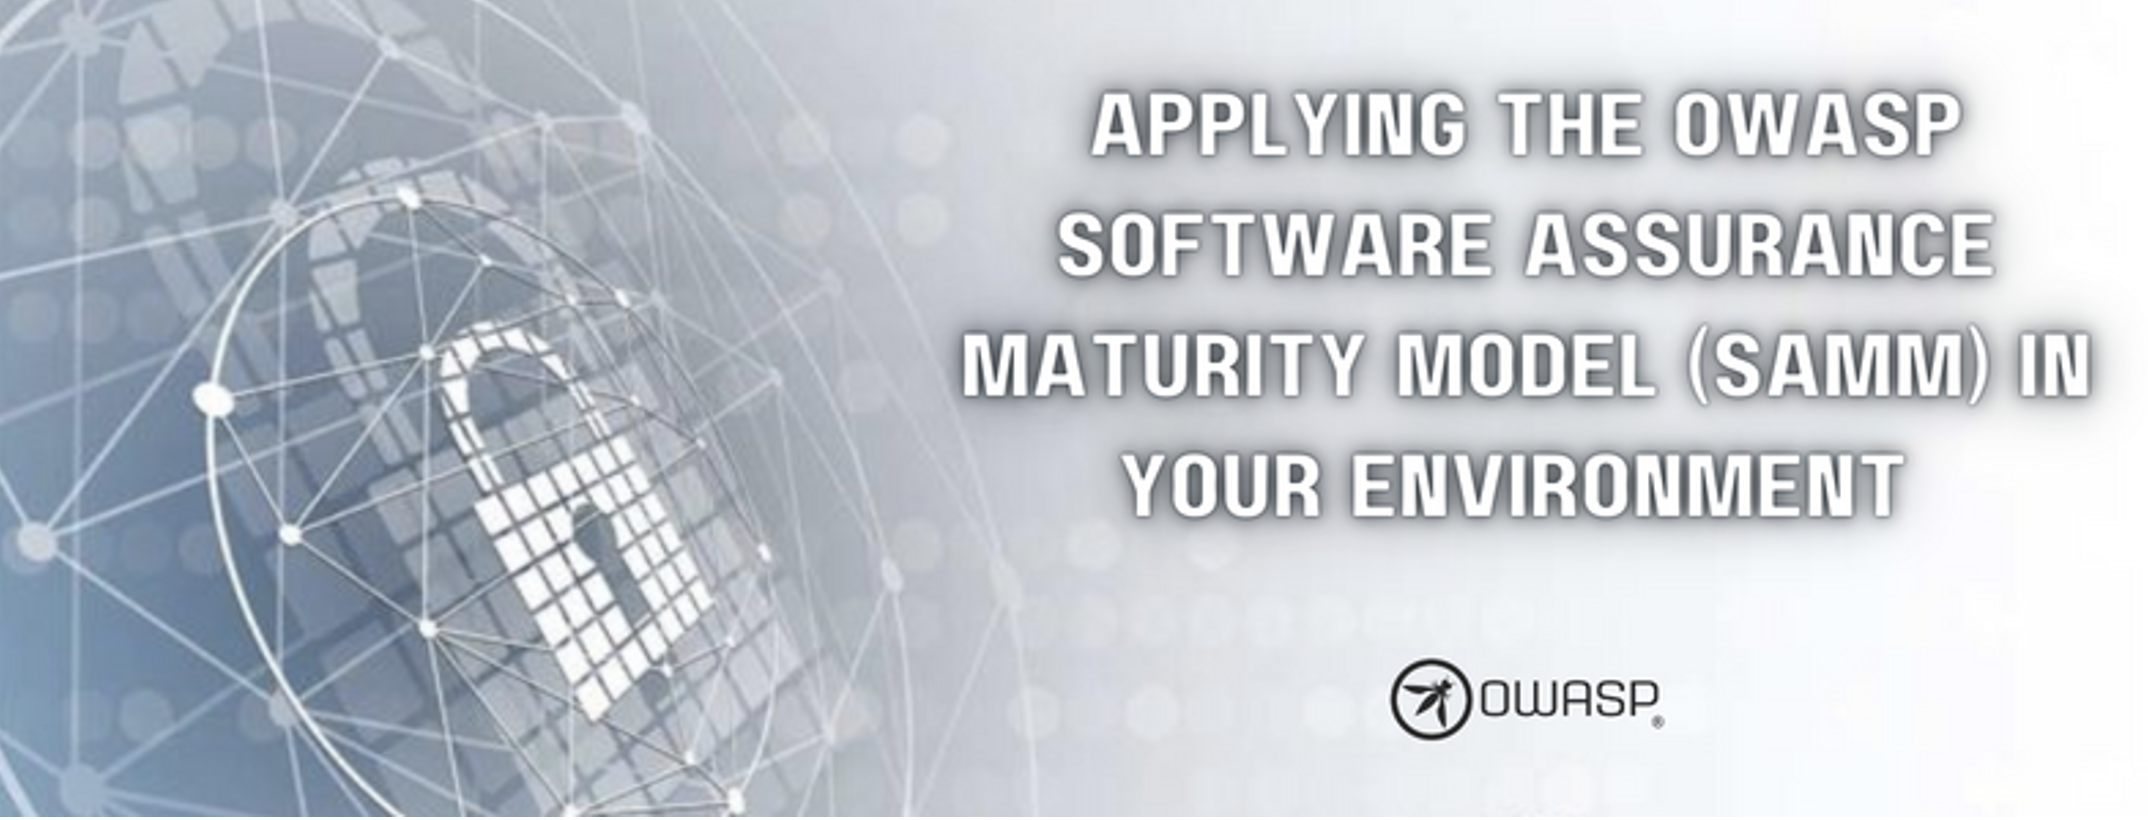 Applying the OWASP Software Assurance Maturity Model (SAMM) in Your Environment